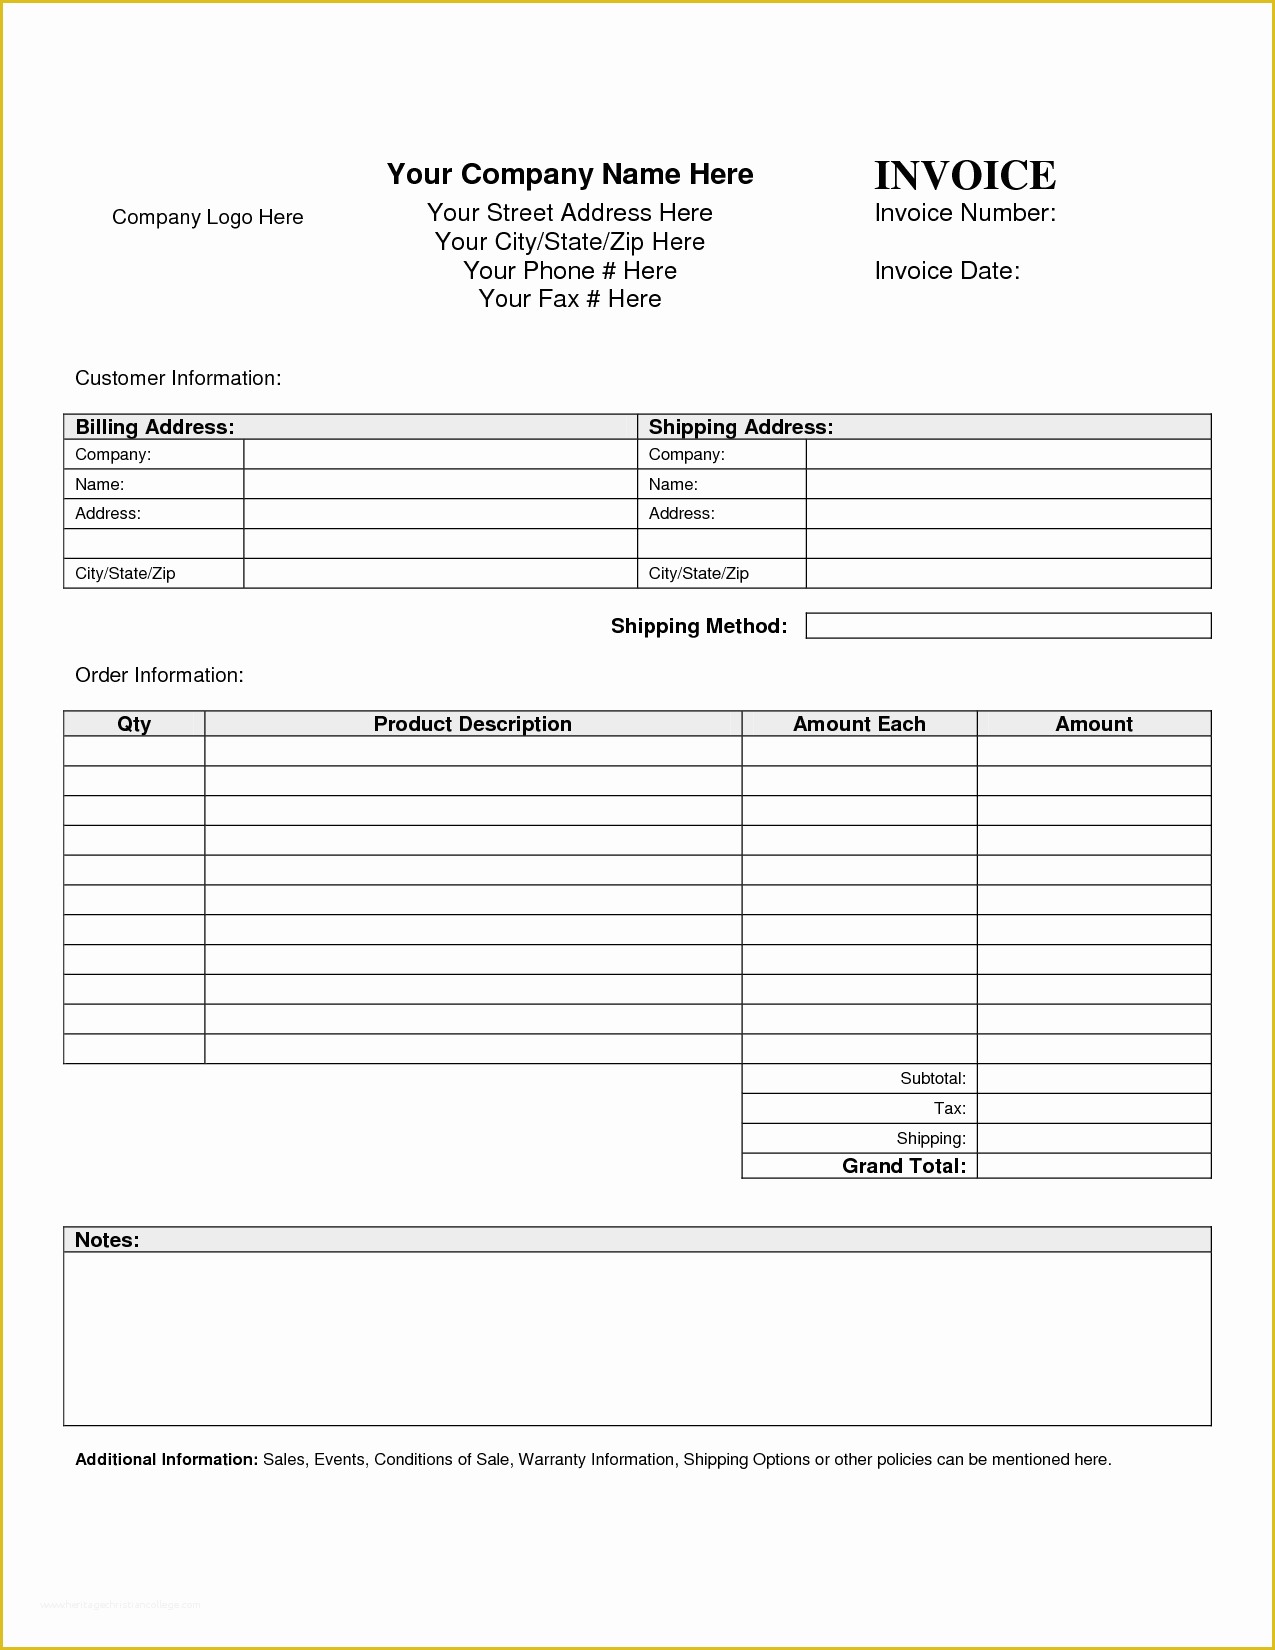 Free Printable Business Invoice Template Of Billing Invoice Template Free